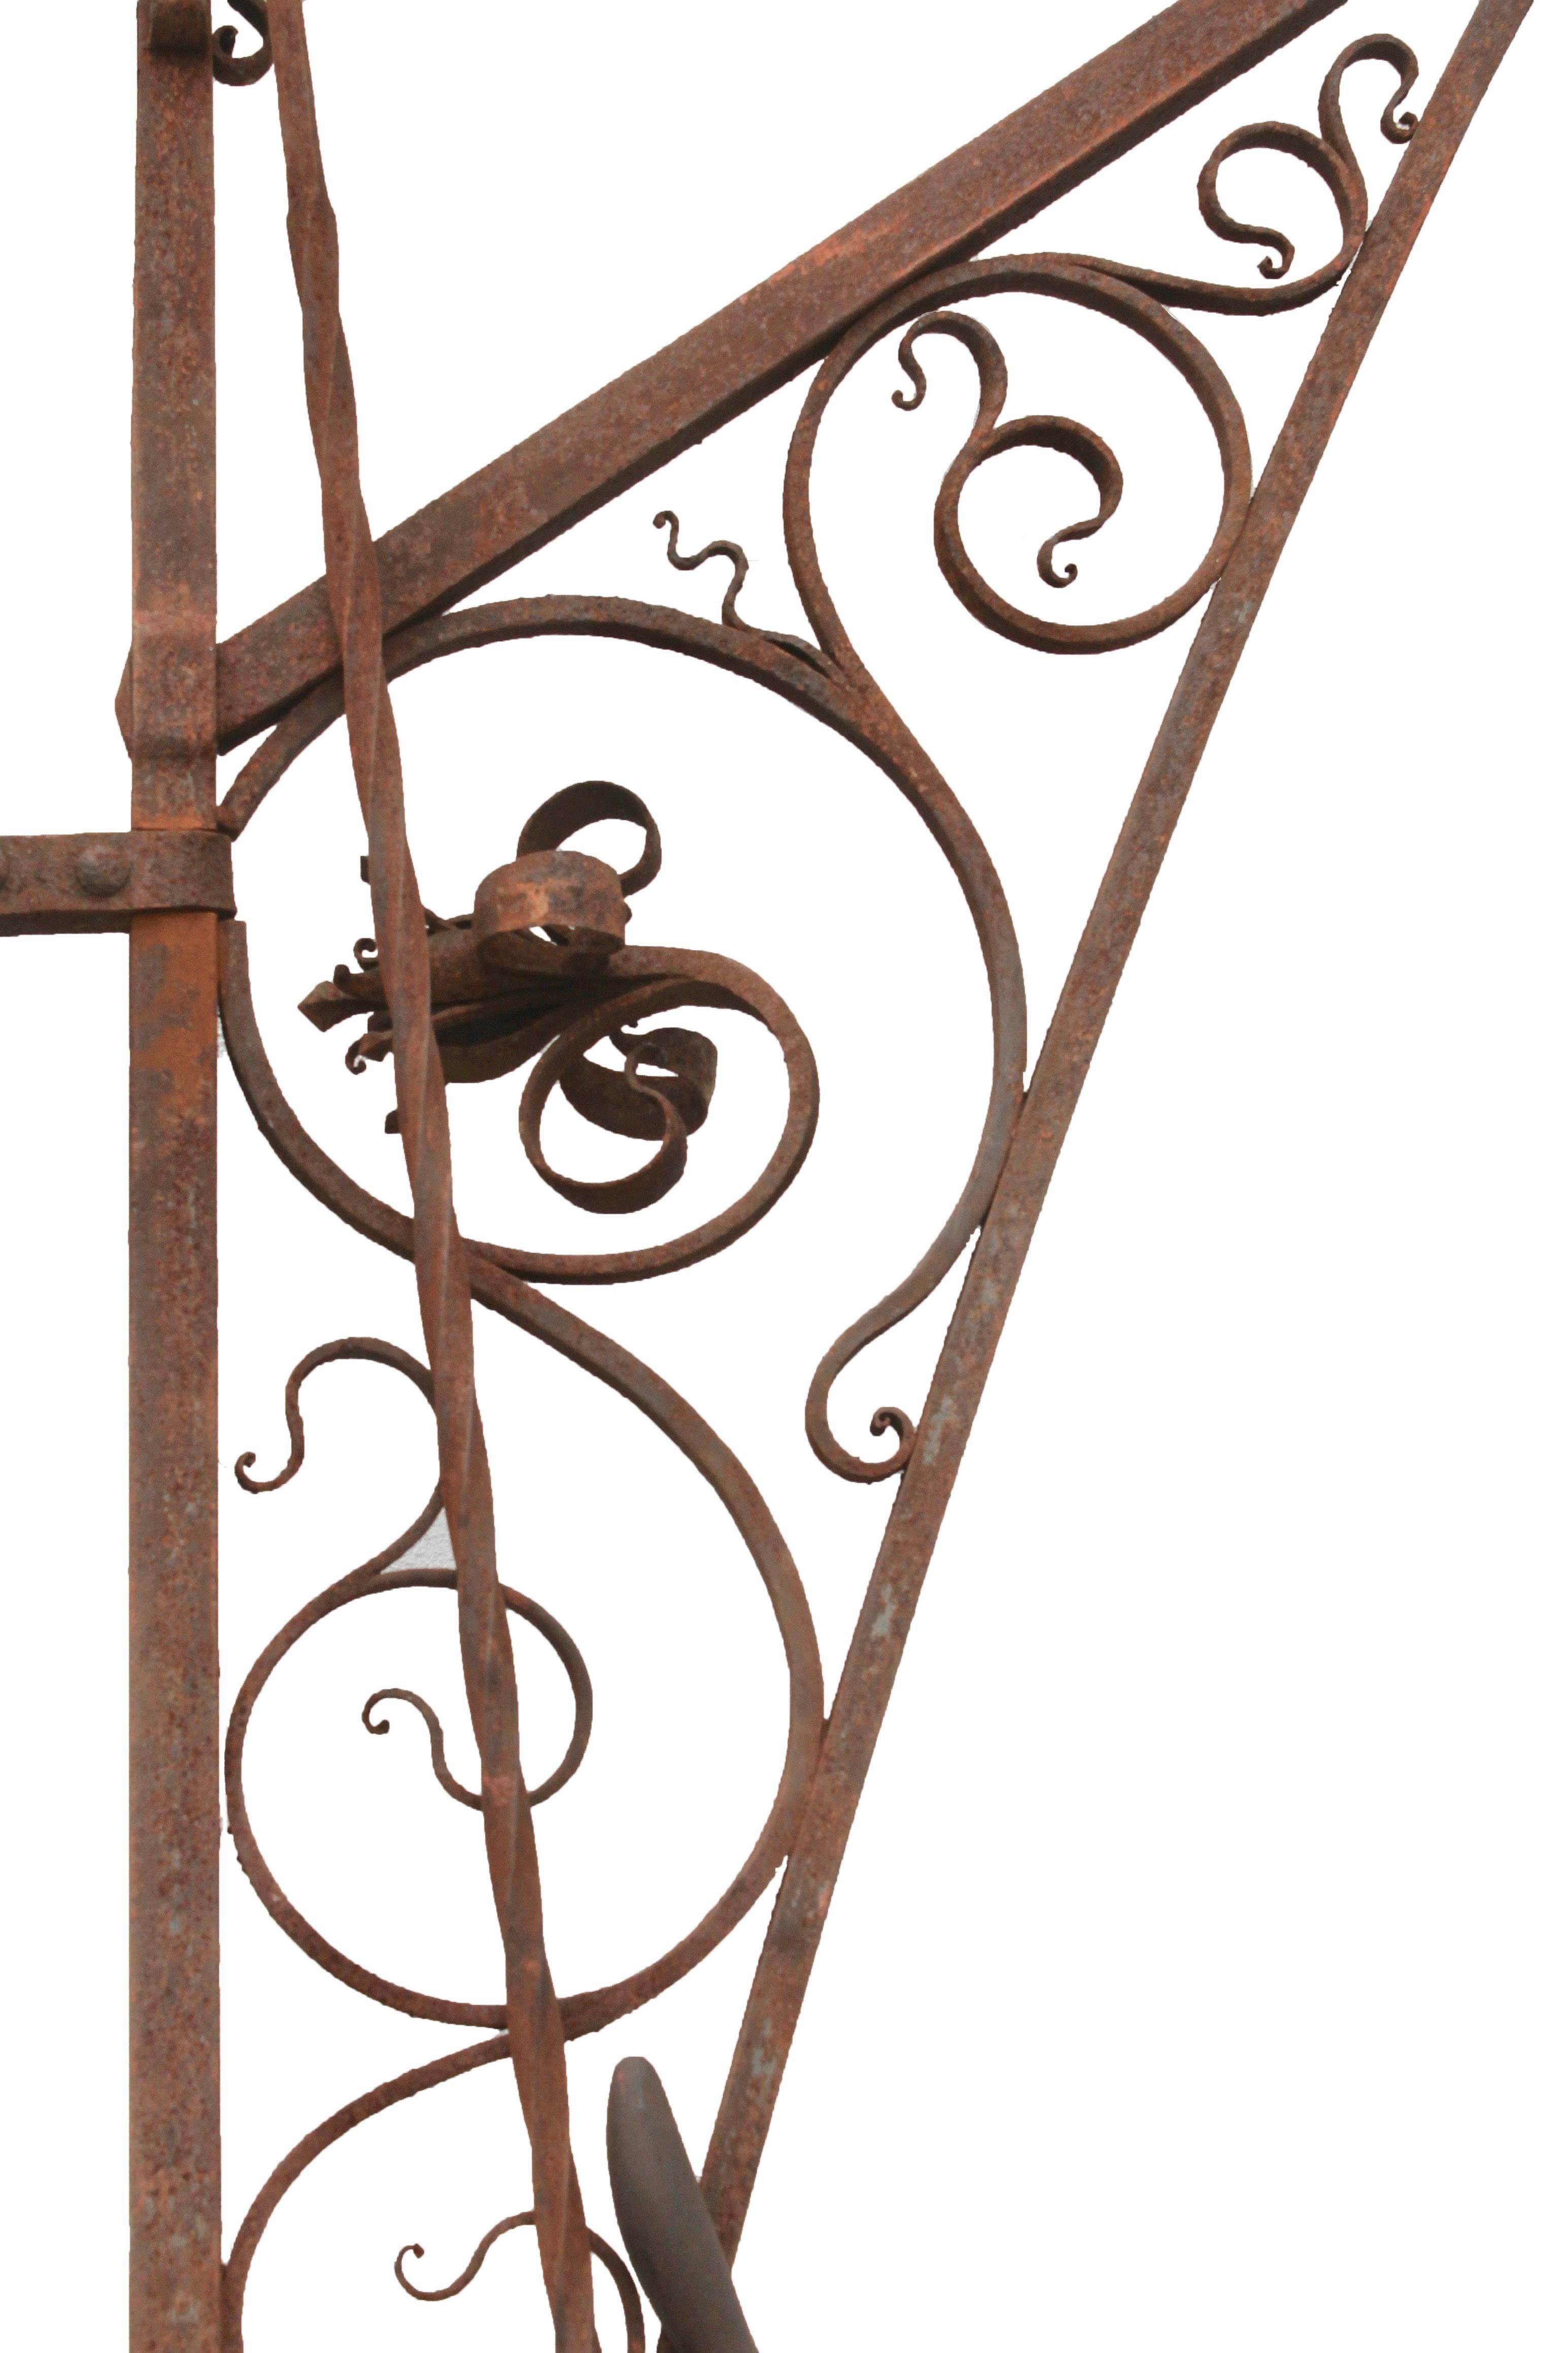 Wall mountable carriage lantern hook with handle and lever for easy access.
This decorative ironwork mounts onto any wall. Pulling the lever will bring down the hook so that you can light an oil lantern, and returning the lever will raise it back